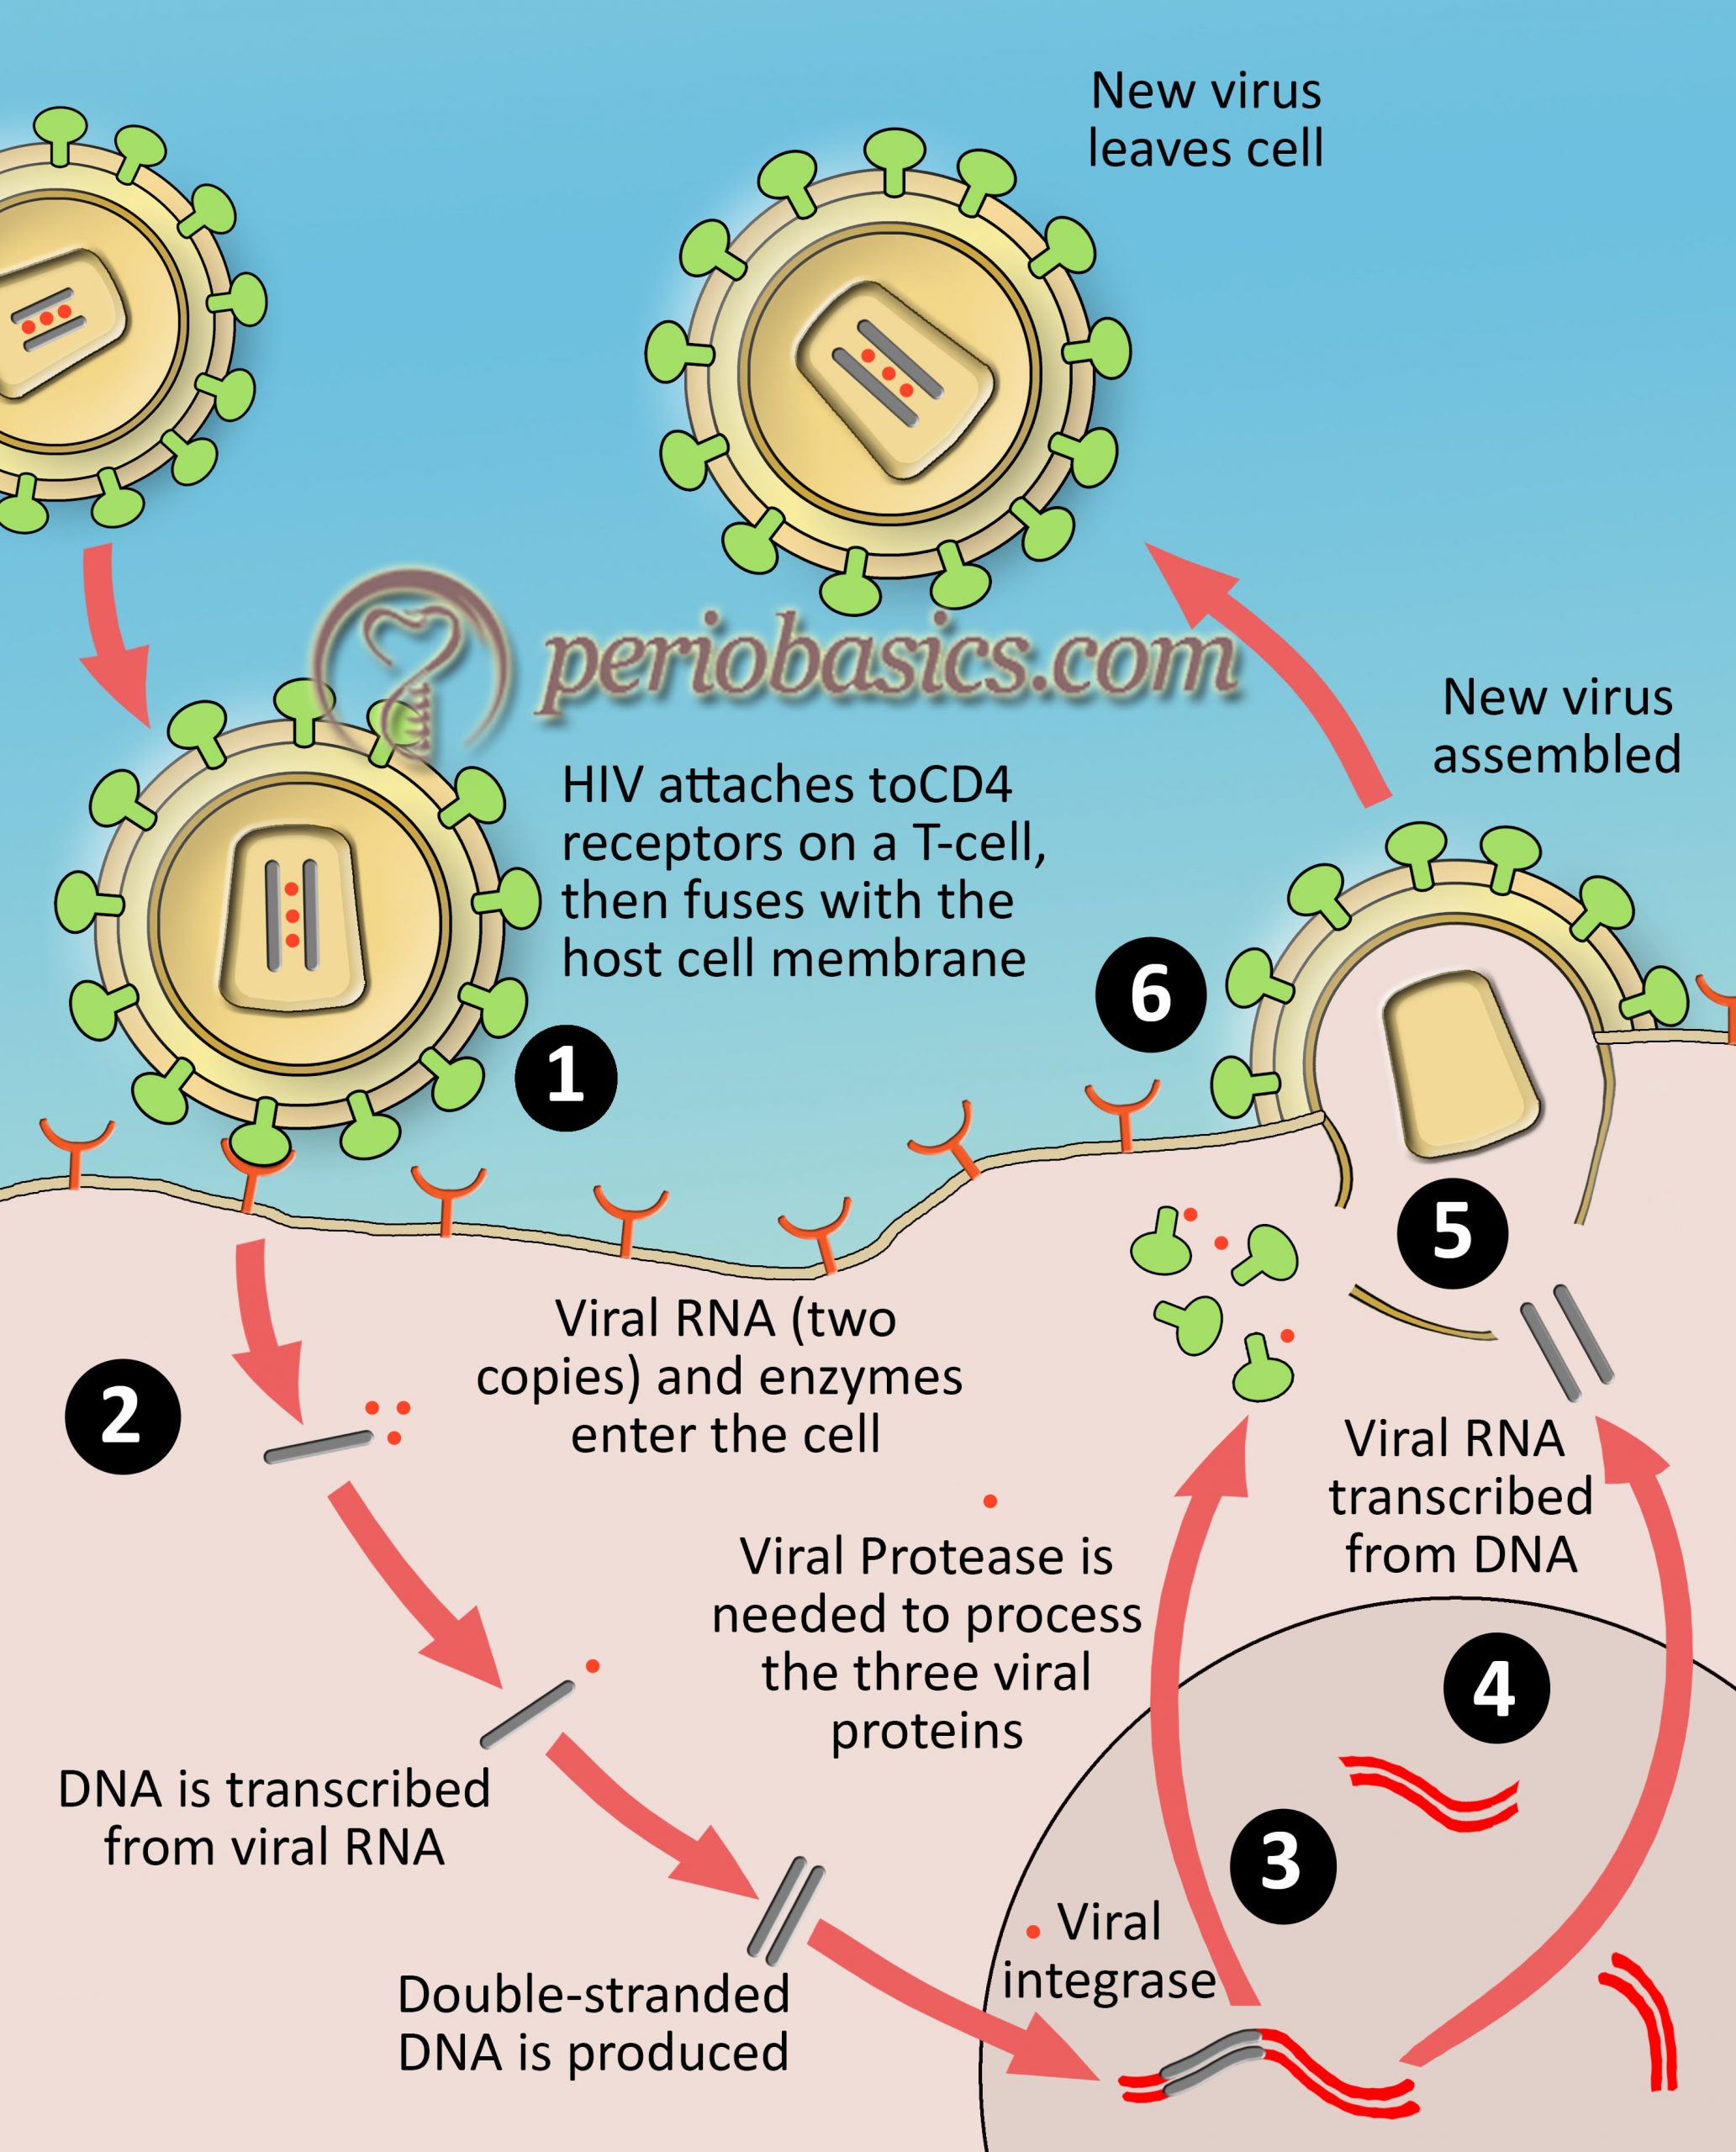 The life cycle of HIV in humans